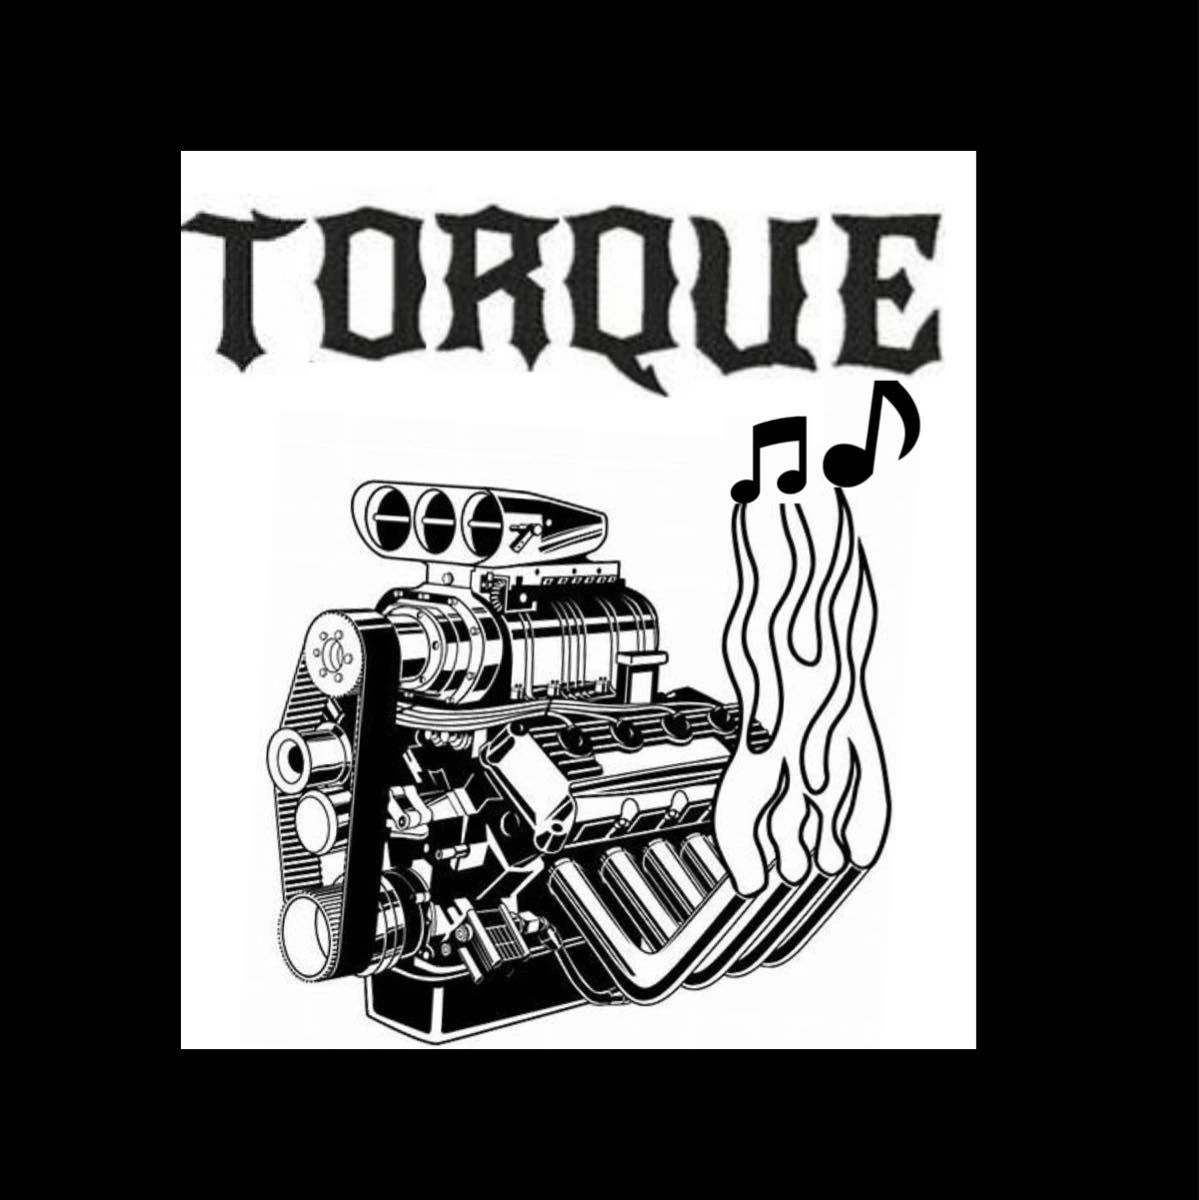 Introduction:
Torque emerges as a dynamic force from the heart of the Kentuckiana area, 










